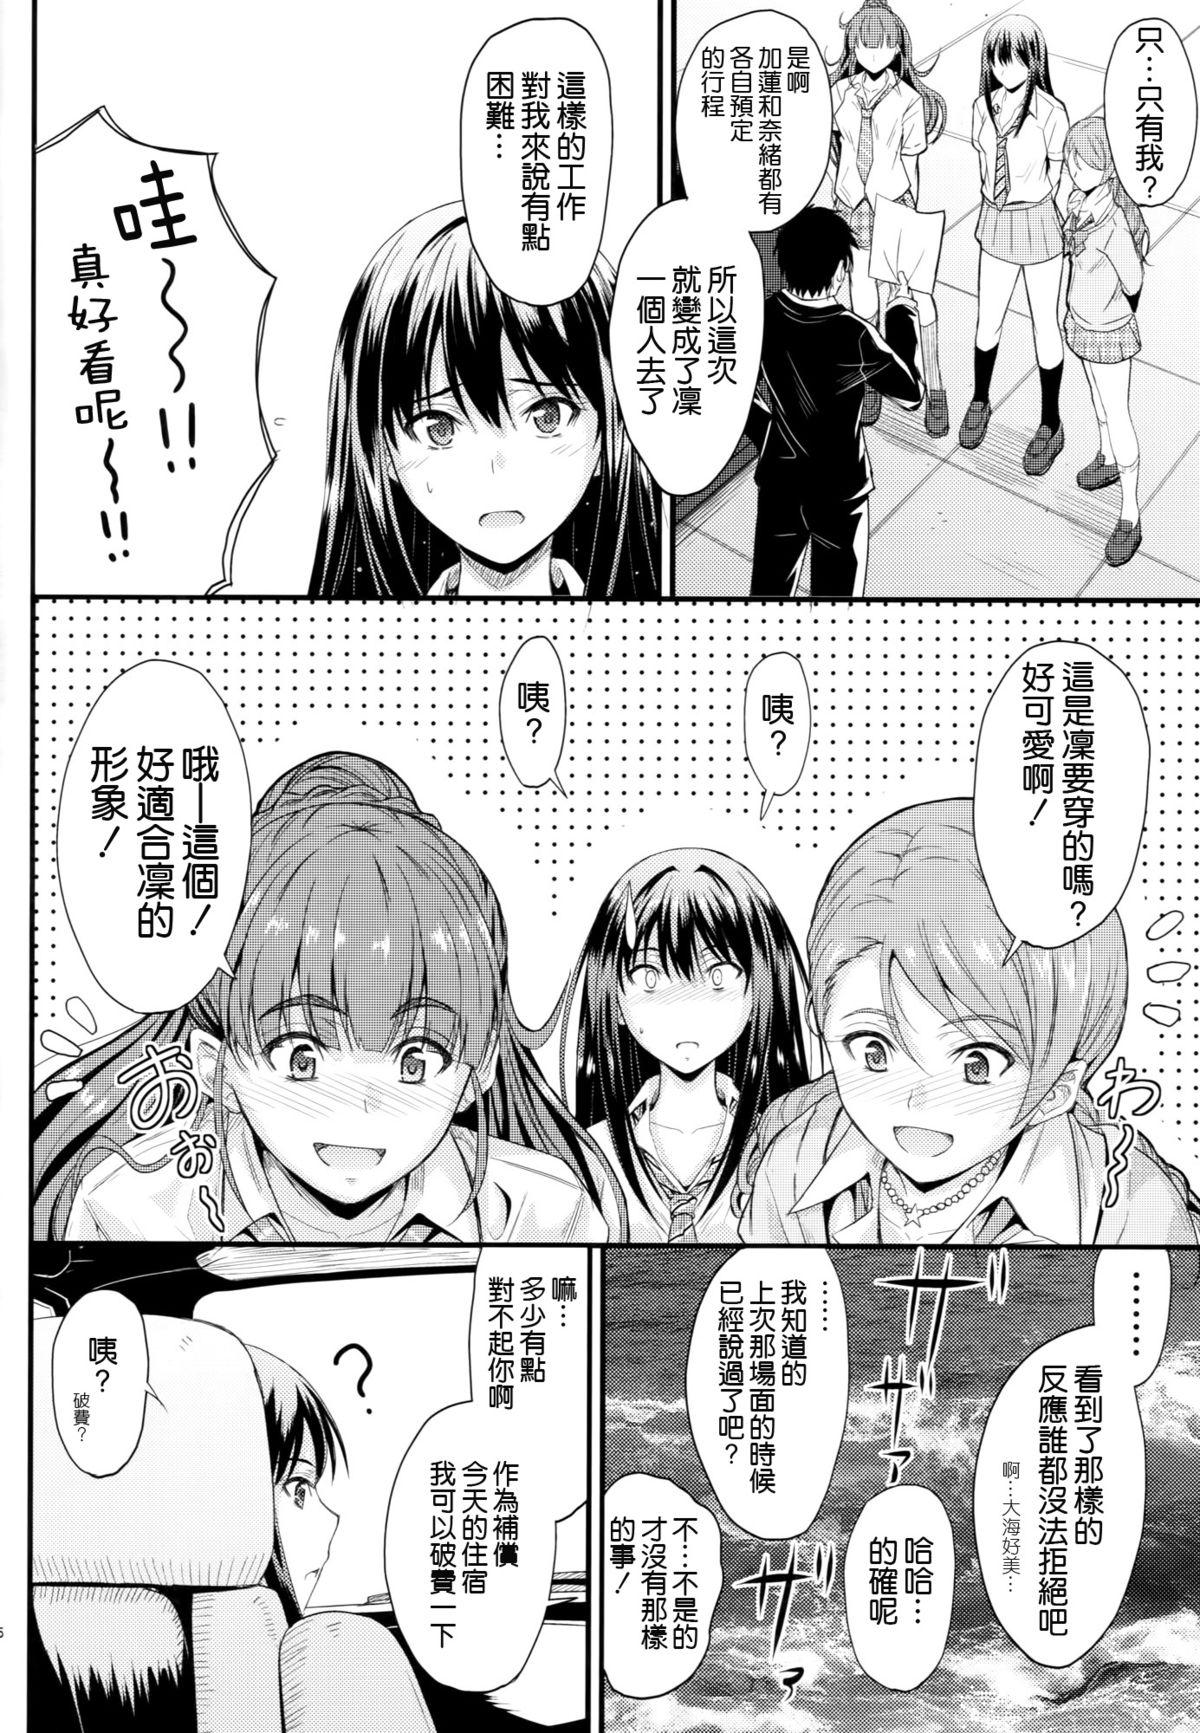 Young Petite Porn Step Up - The idolmaster Cfnm - Page 6